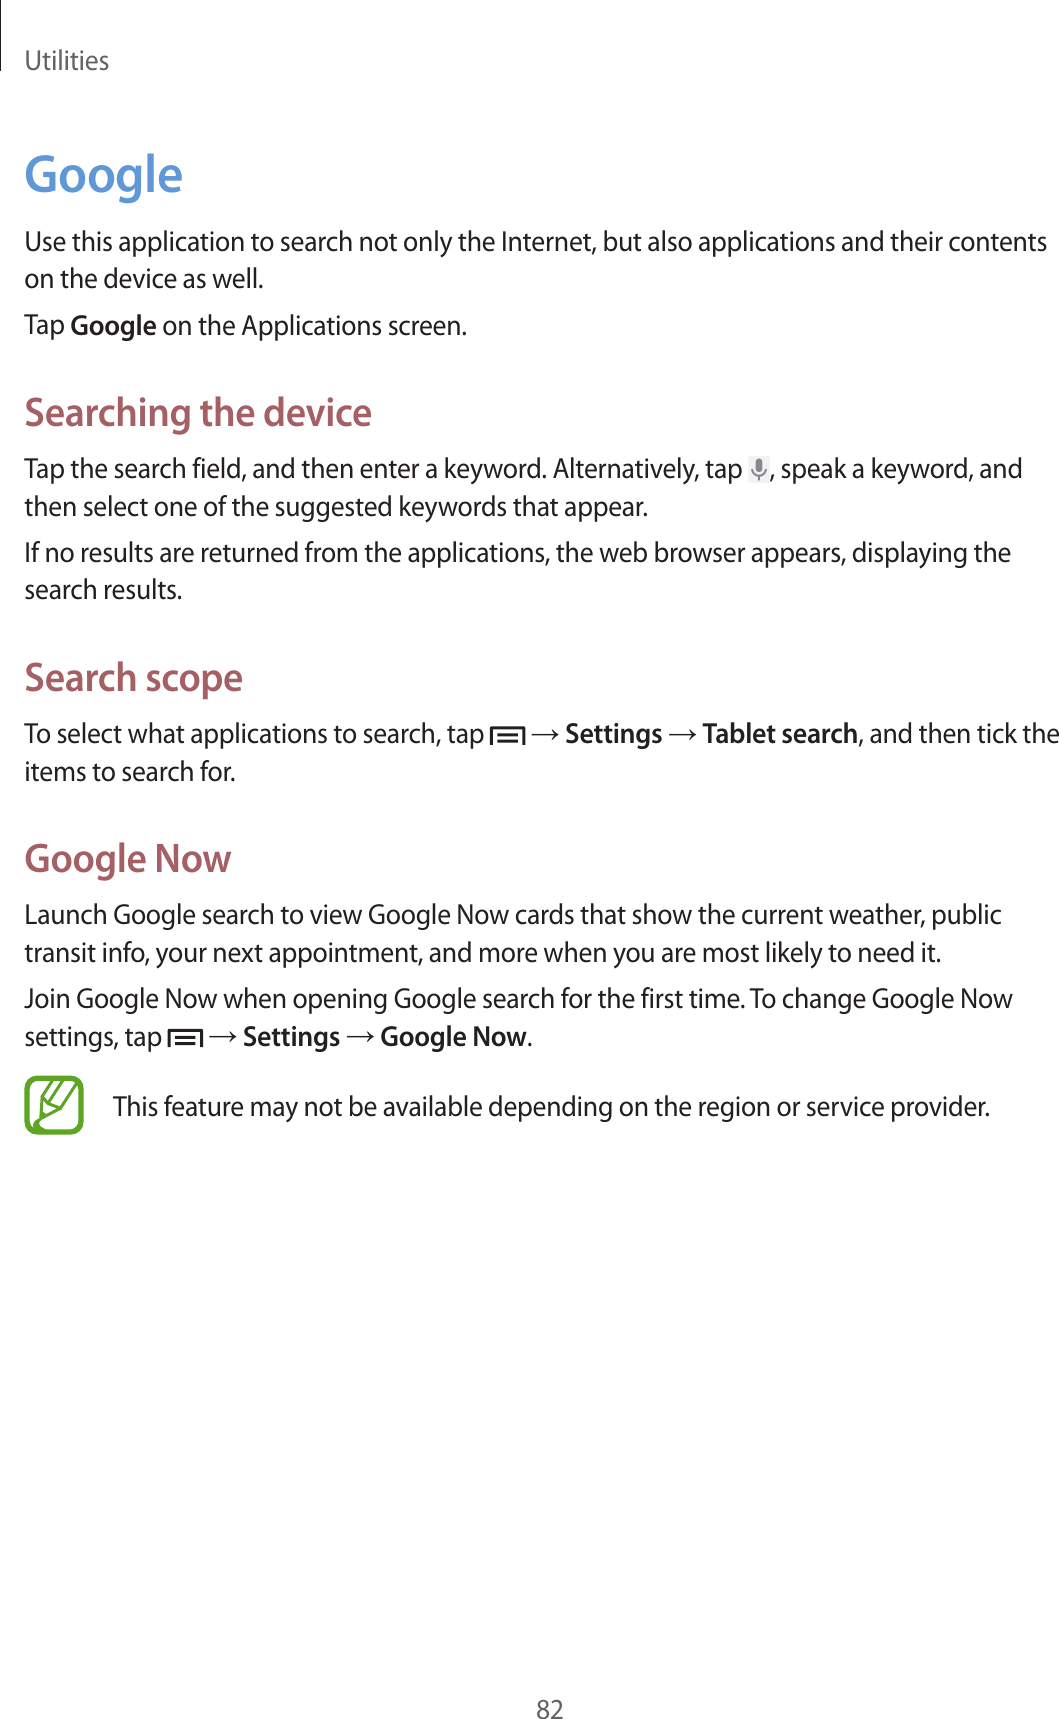 Utilities82GoogleUse this application to search not only the Internet, but also applications and their contents on the device as well.Tap Google on the Applications screen.Searching the deviceTap the search field, and then enter a keyword. Alternatively, tap  , speak a keyword, and then select one of the suggested keywords that appear.If no results are returned from the applications, the web browser appears, displaying the search results.Search scopeTo select what applications to search, tap   → Settings → Tablet search, and then tick the items to search for.Google NowLaunch Google search to view Google Now cards that show the current weather, public transit info, your next appointment, and more when you are most likely to need it.Join Google Now when opening Google search for the first time. To change Google Now settings, tap   → Settings → Google Now.This feature may not be available depending on the region or service provider.